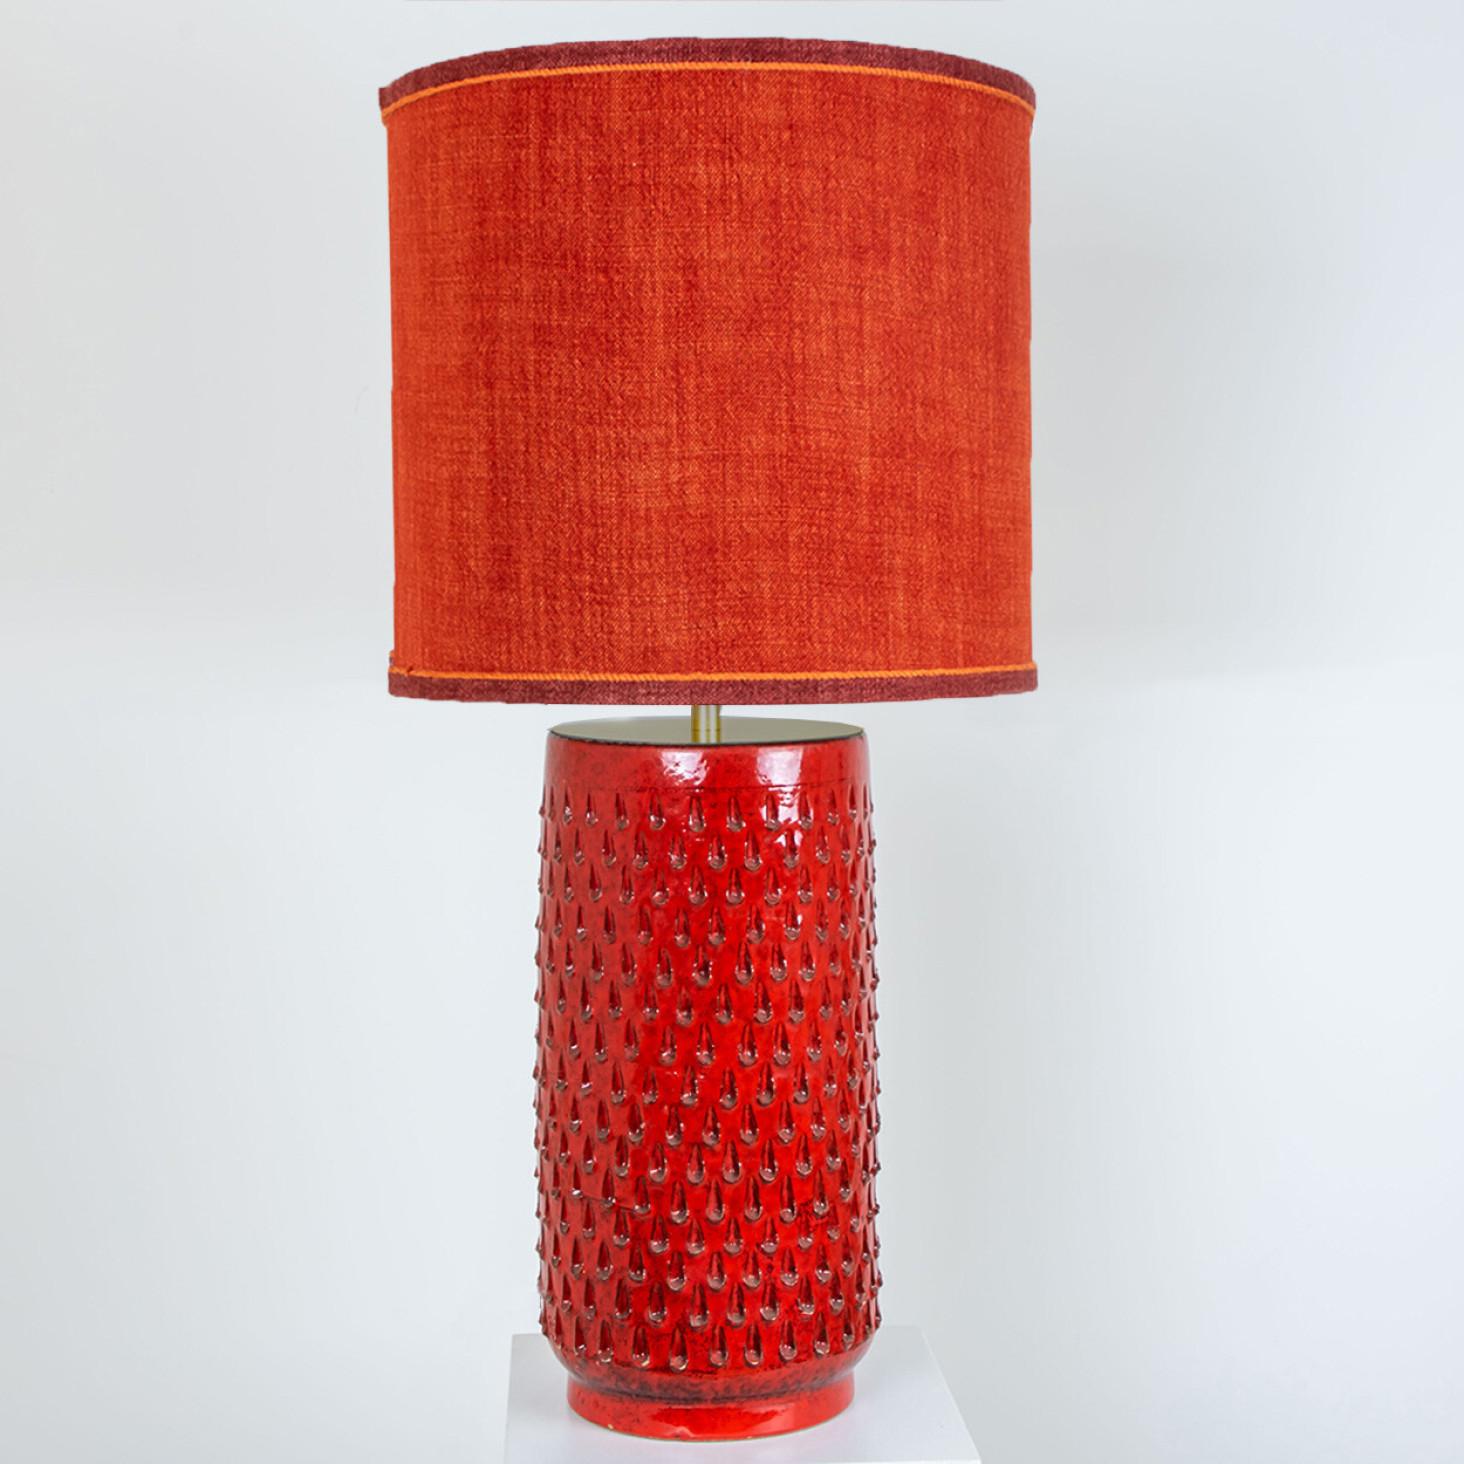 Unique ceramic floorlamp by Fratelli Fanciullacci  for Bitossi. A sculptural high-end piece made of handmade ceramic in red tones. With an exceptional new custom made red silk lampshade by René Houben. With warm bronze/gold inner-shade.

The lamp is